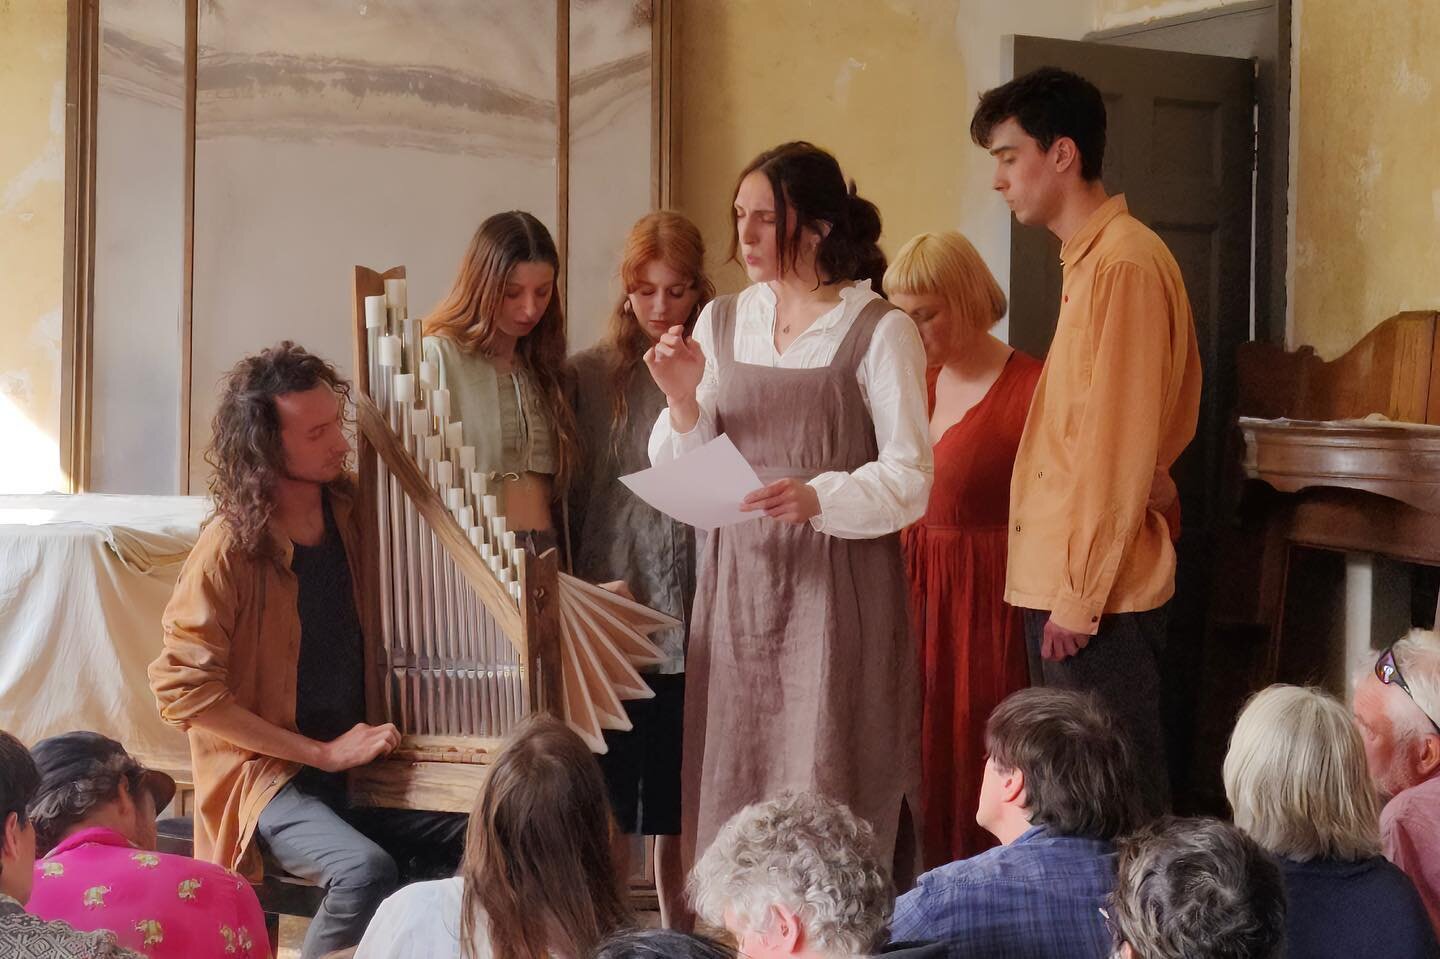 We sung in a tranquil London nook, under the @_magpies_nest 🍃 Thank you @nest.collective 
.
.
.
.

#medieval&nbsp;#medievalmusic&nbsp;#oldromanchant&nbsp;#meditativemusic&nbsp;#chanting&nbsp;#chants&nbsp;#singing&nbsp;#ancient&nbsp;#manuscript&nbsp;